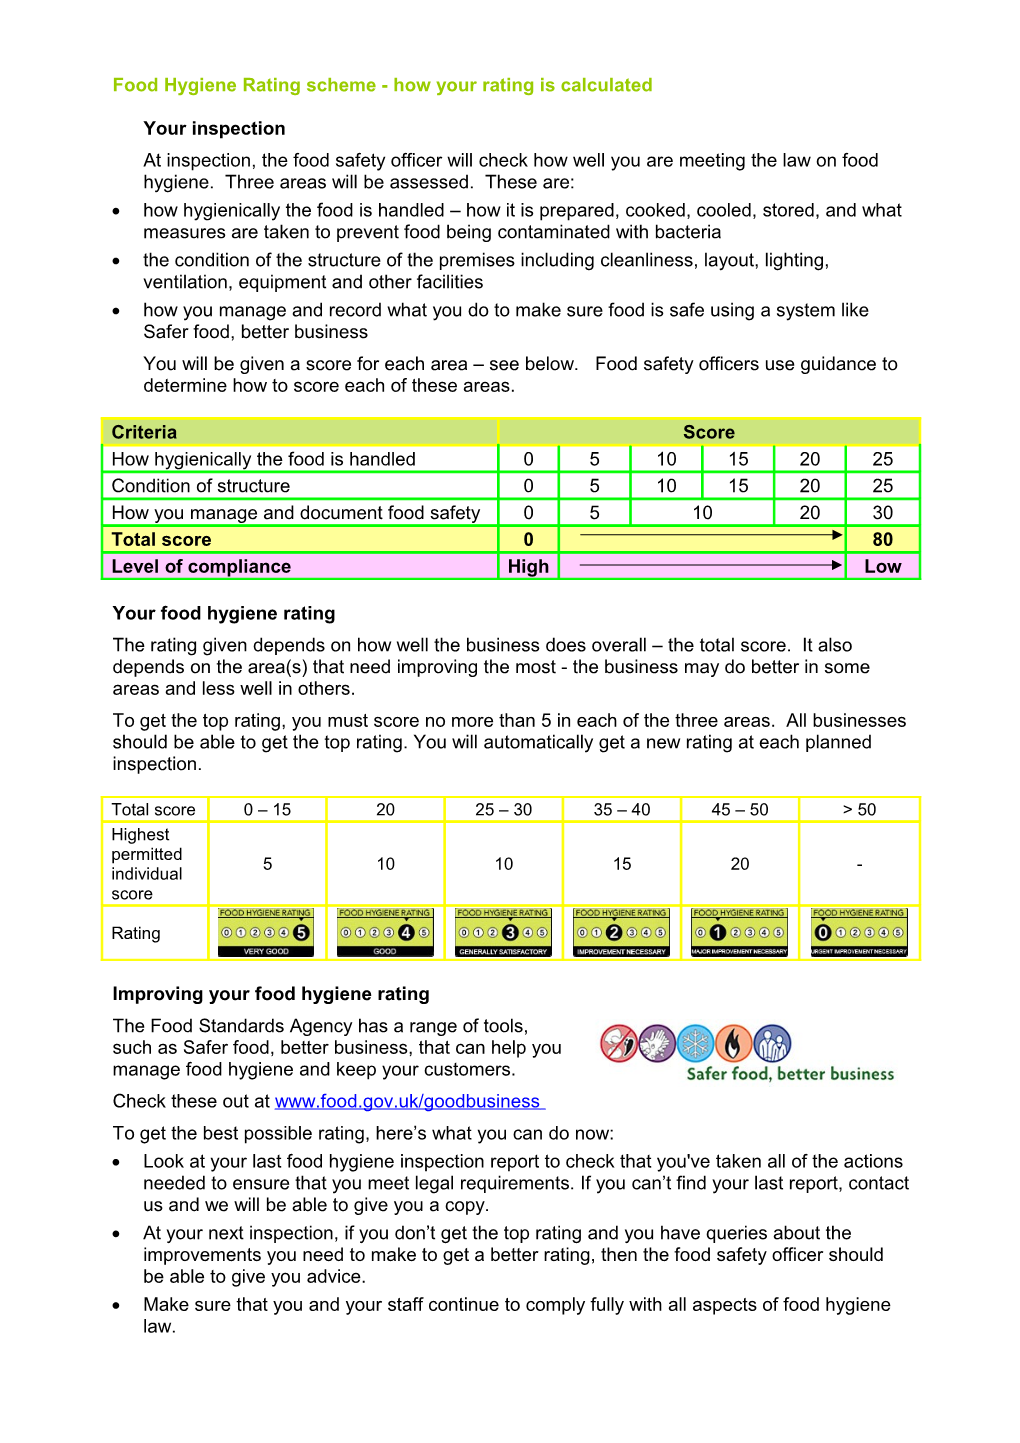 Food Hygiene Rating Scheme - How Your Rating Is Calculated